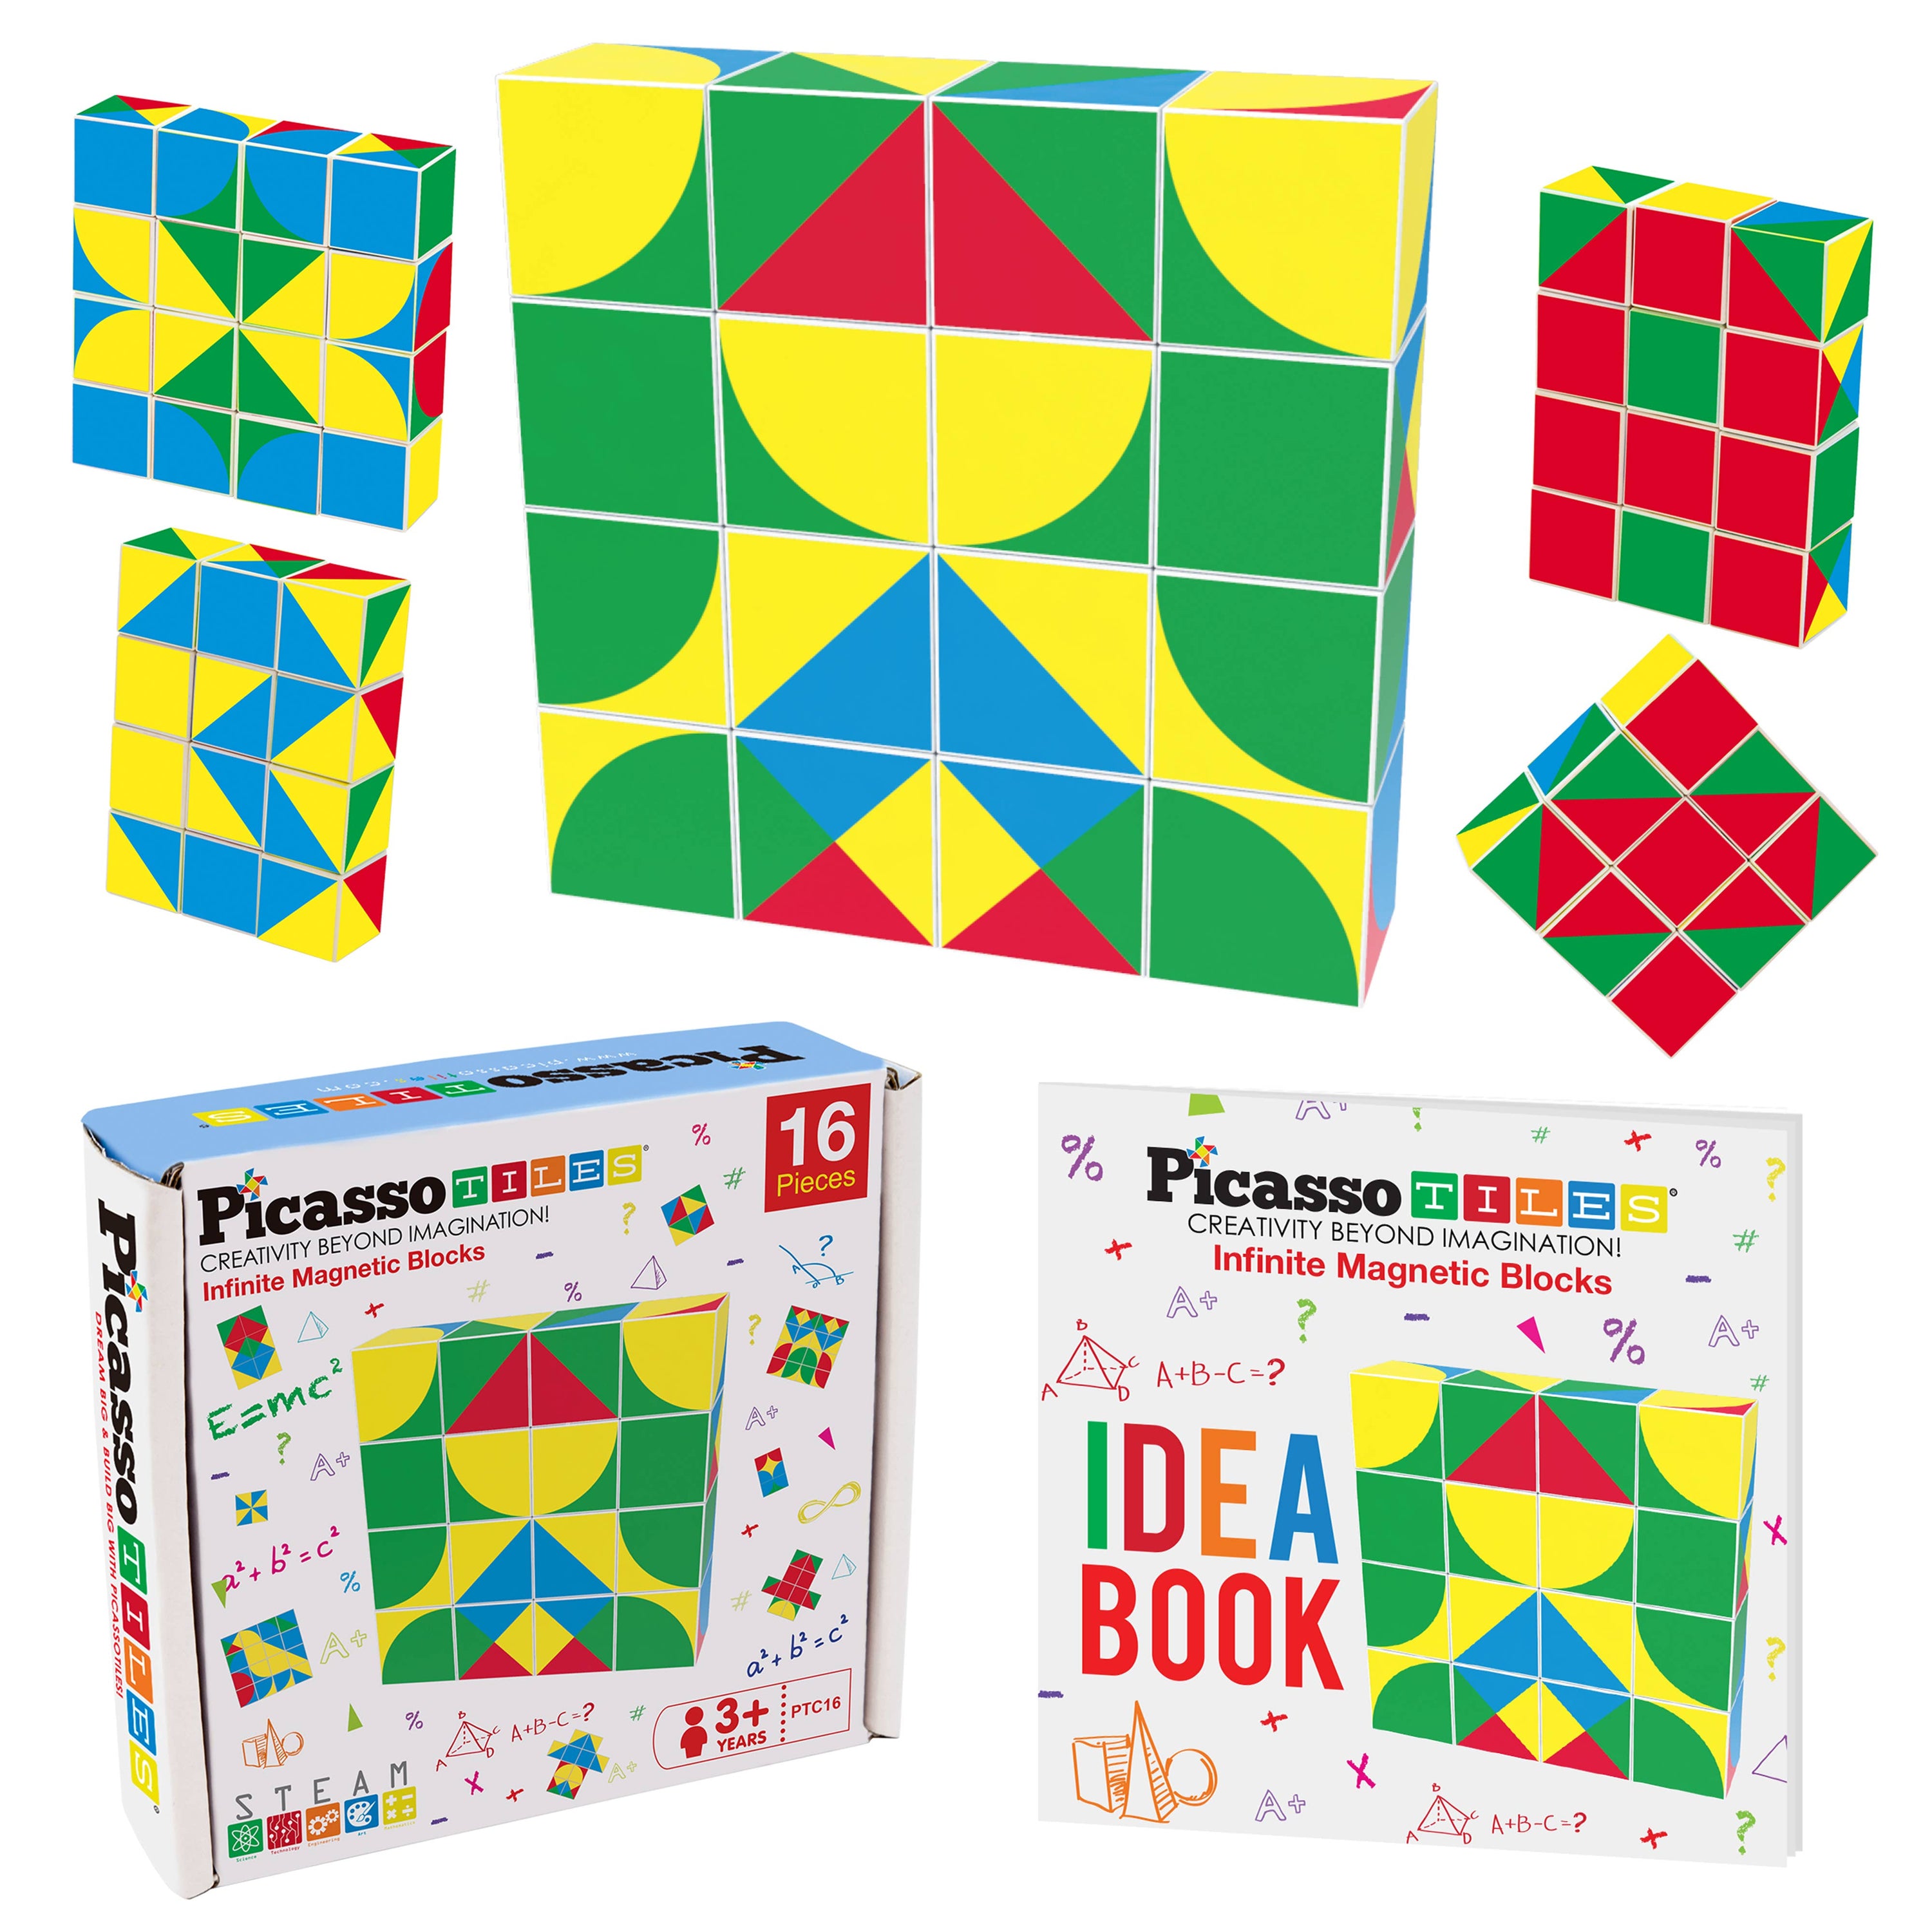 Several designs of the Infinite Magnetic Cube Set pictured above the product package and the Idea Book that is included.